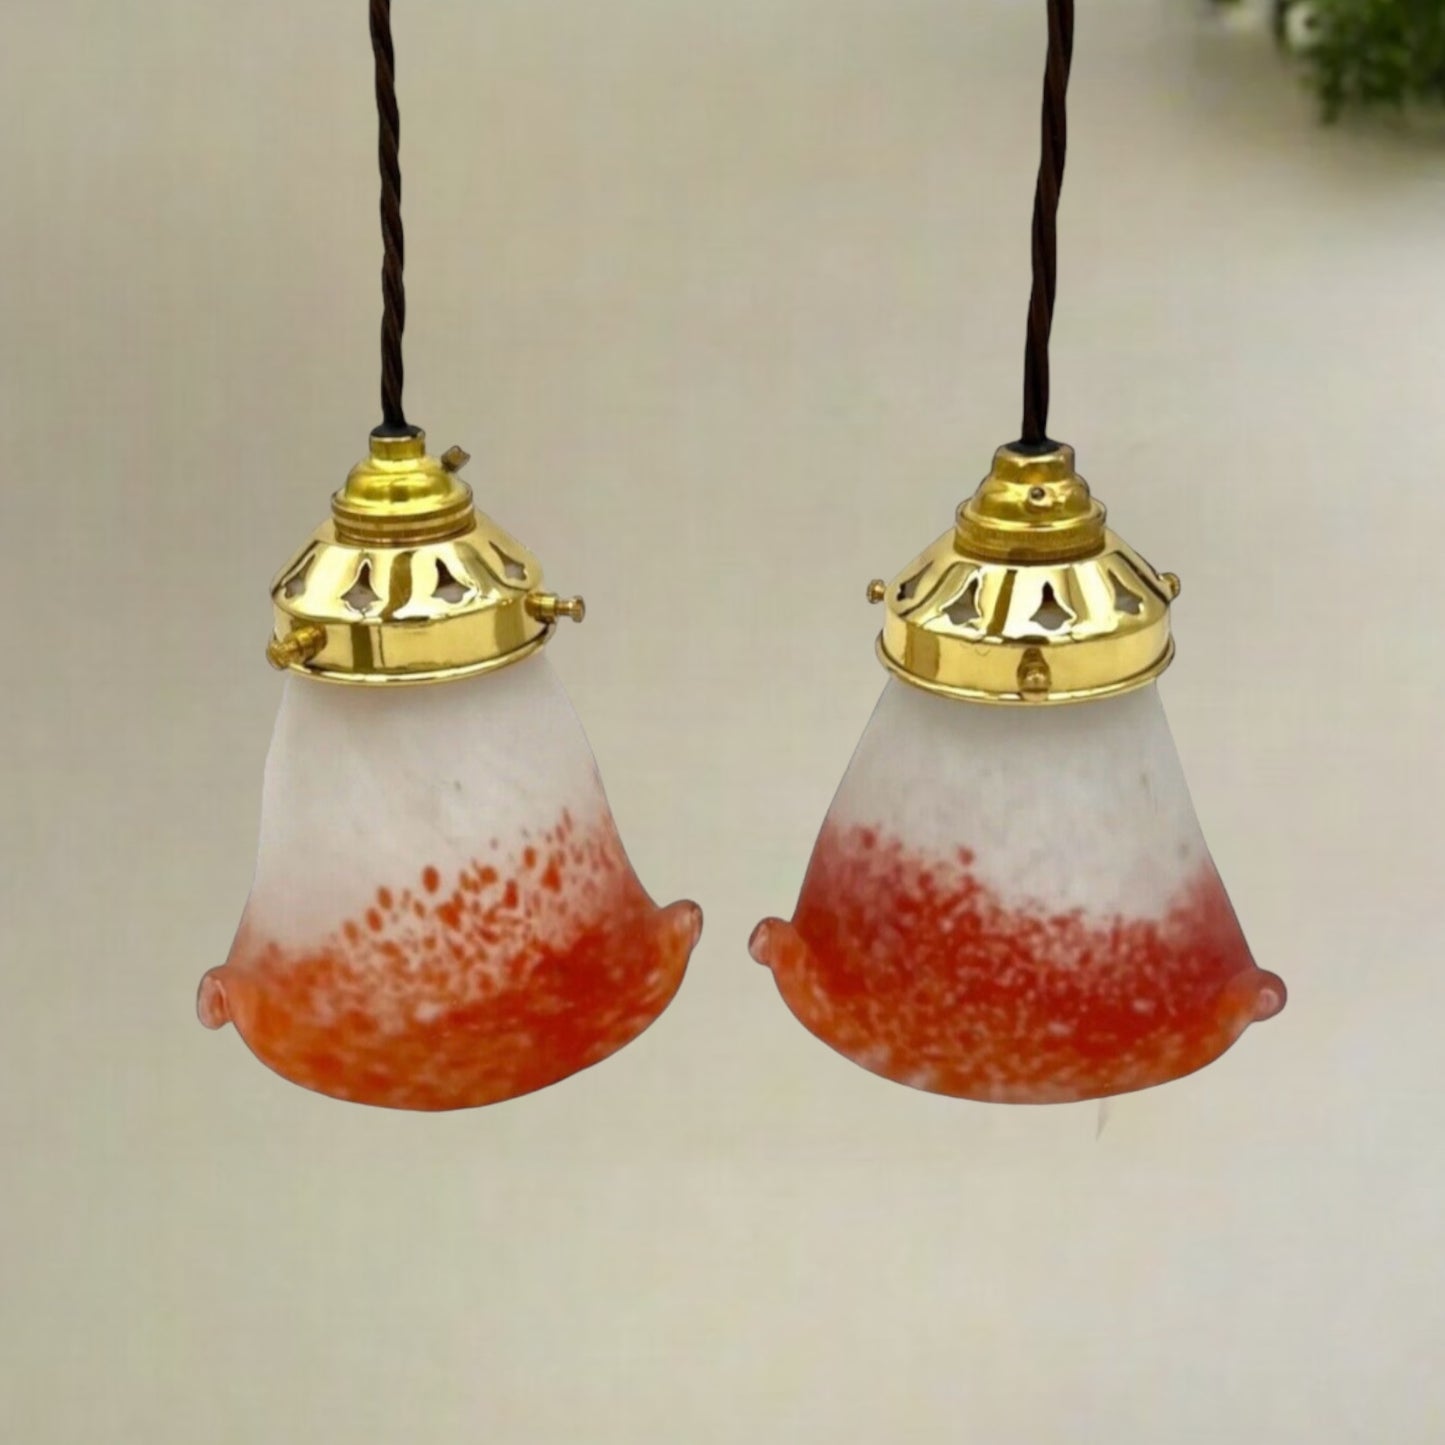 Pair of French Vintage Pendant Glass Ceiling Lamp Shades with new fittings